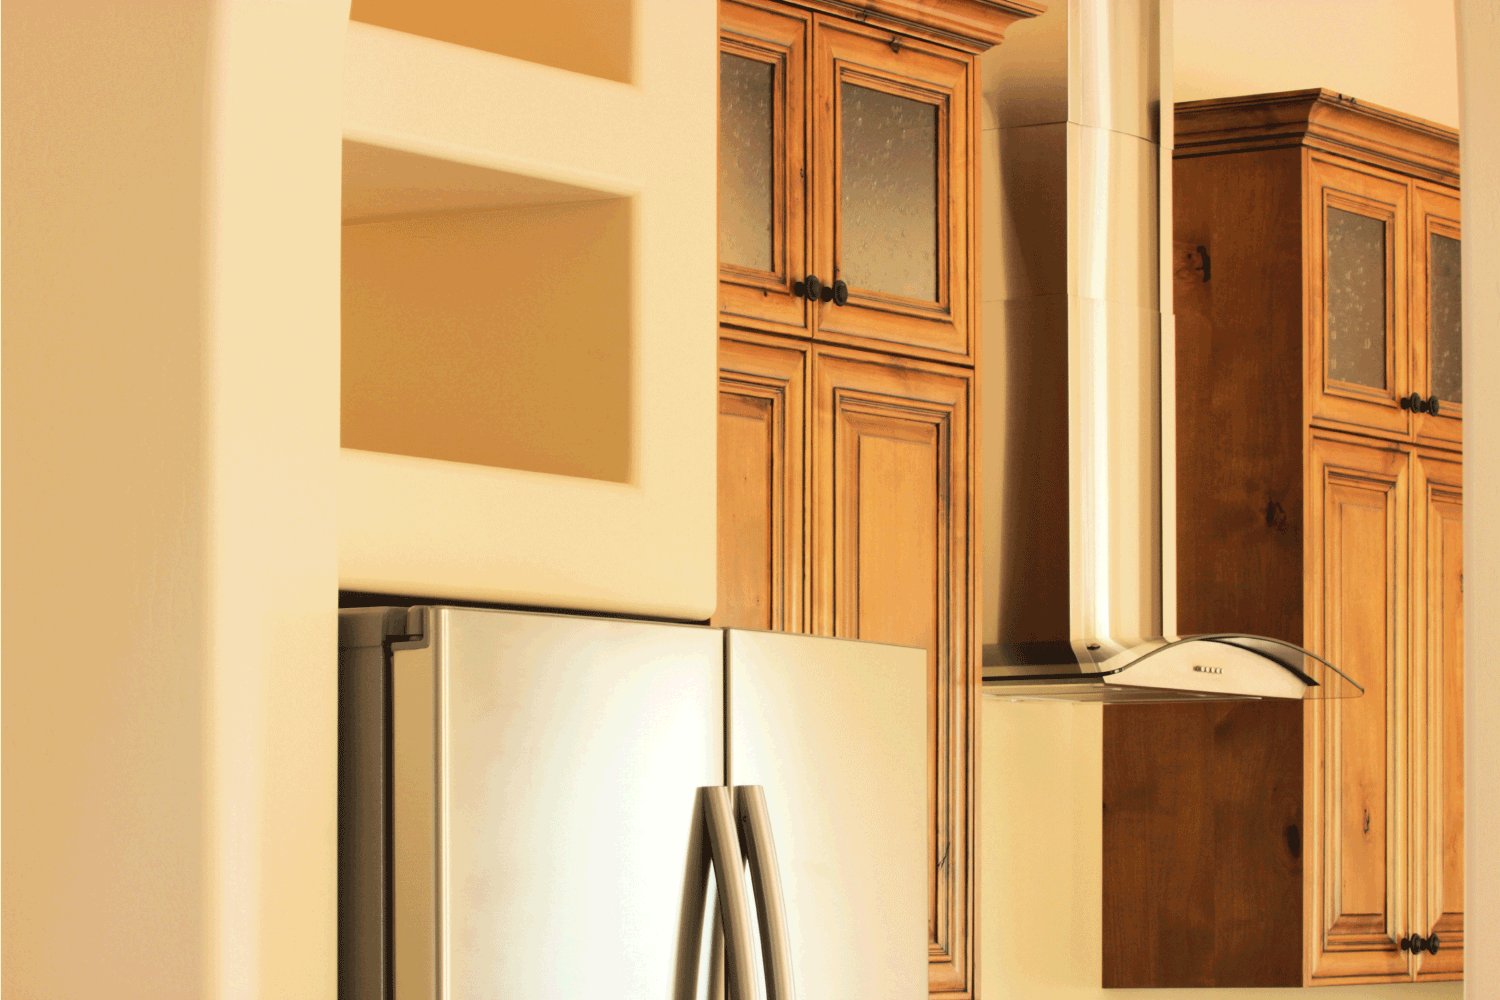 contemporary kitchen cabinets, laminated wood panels